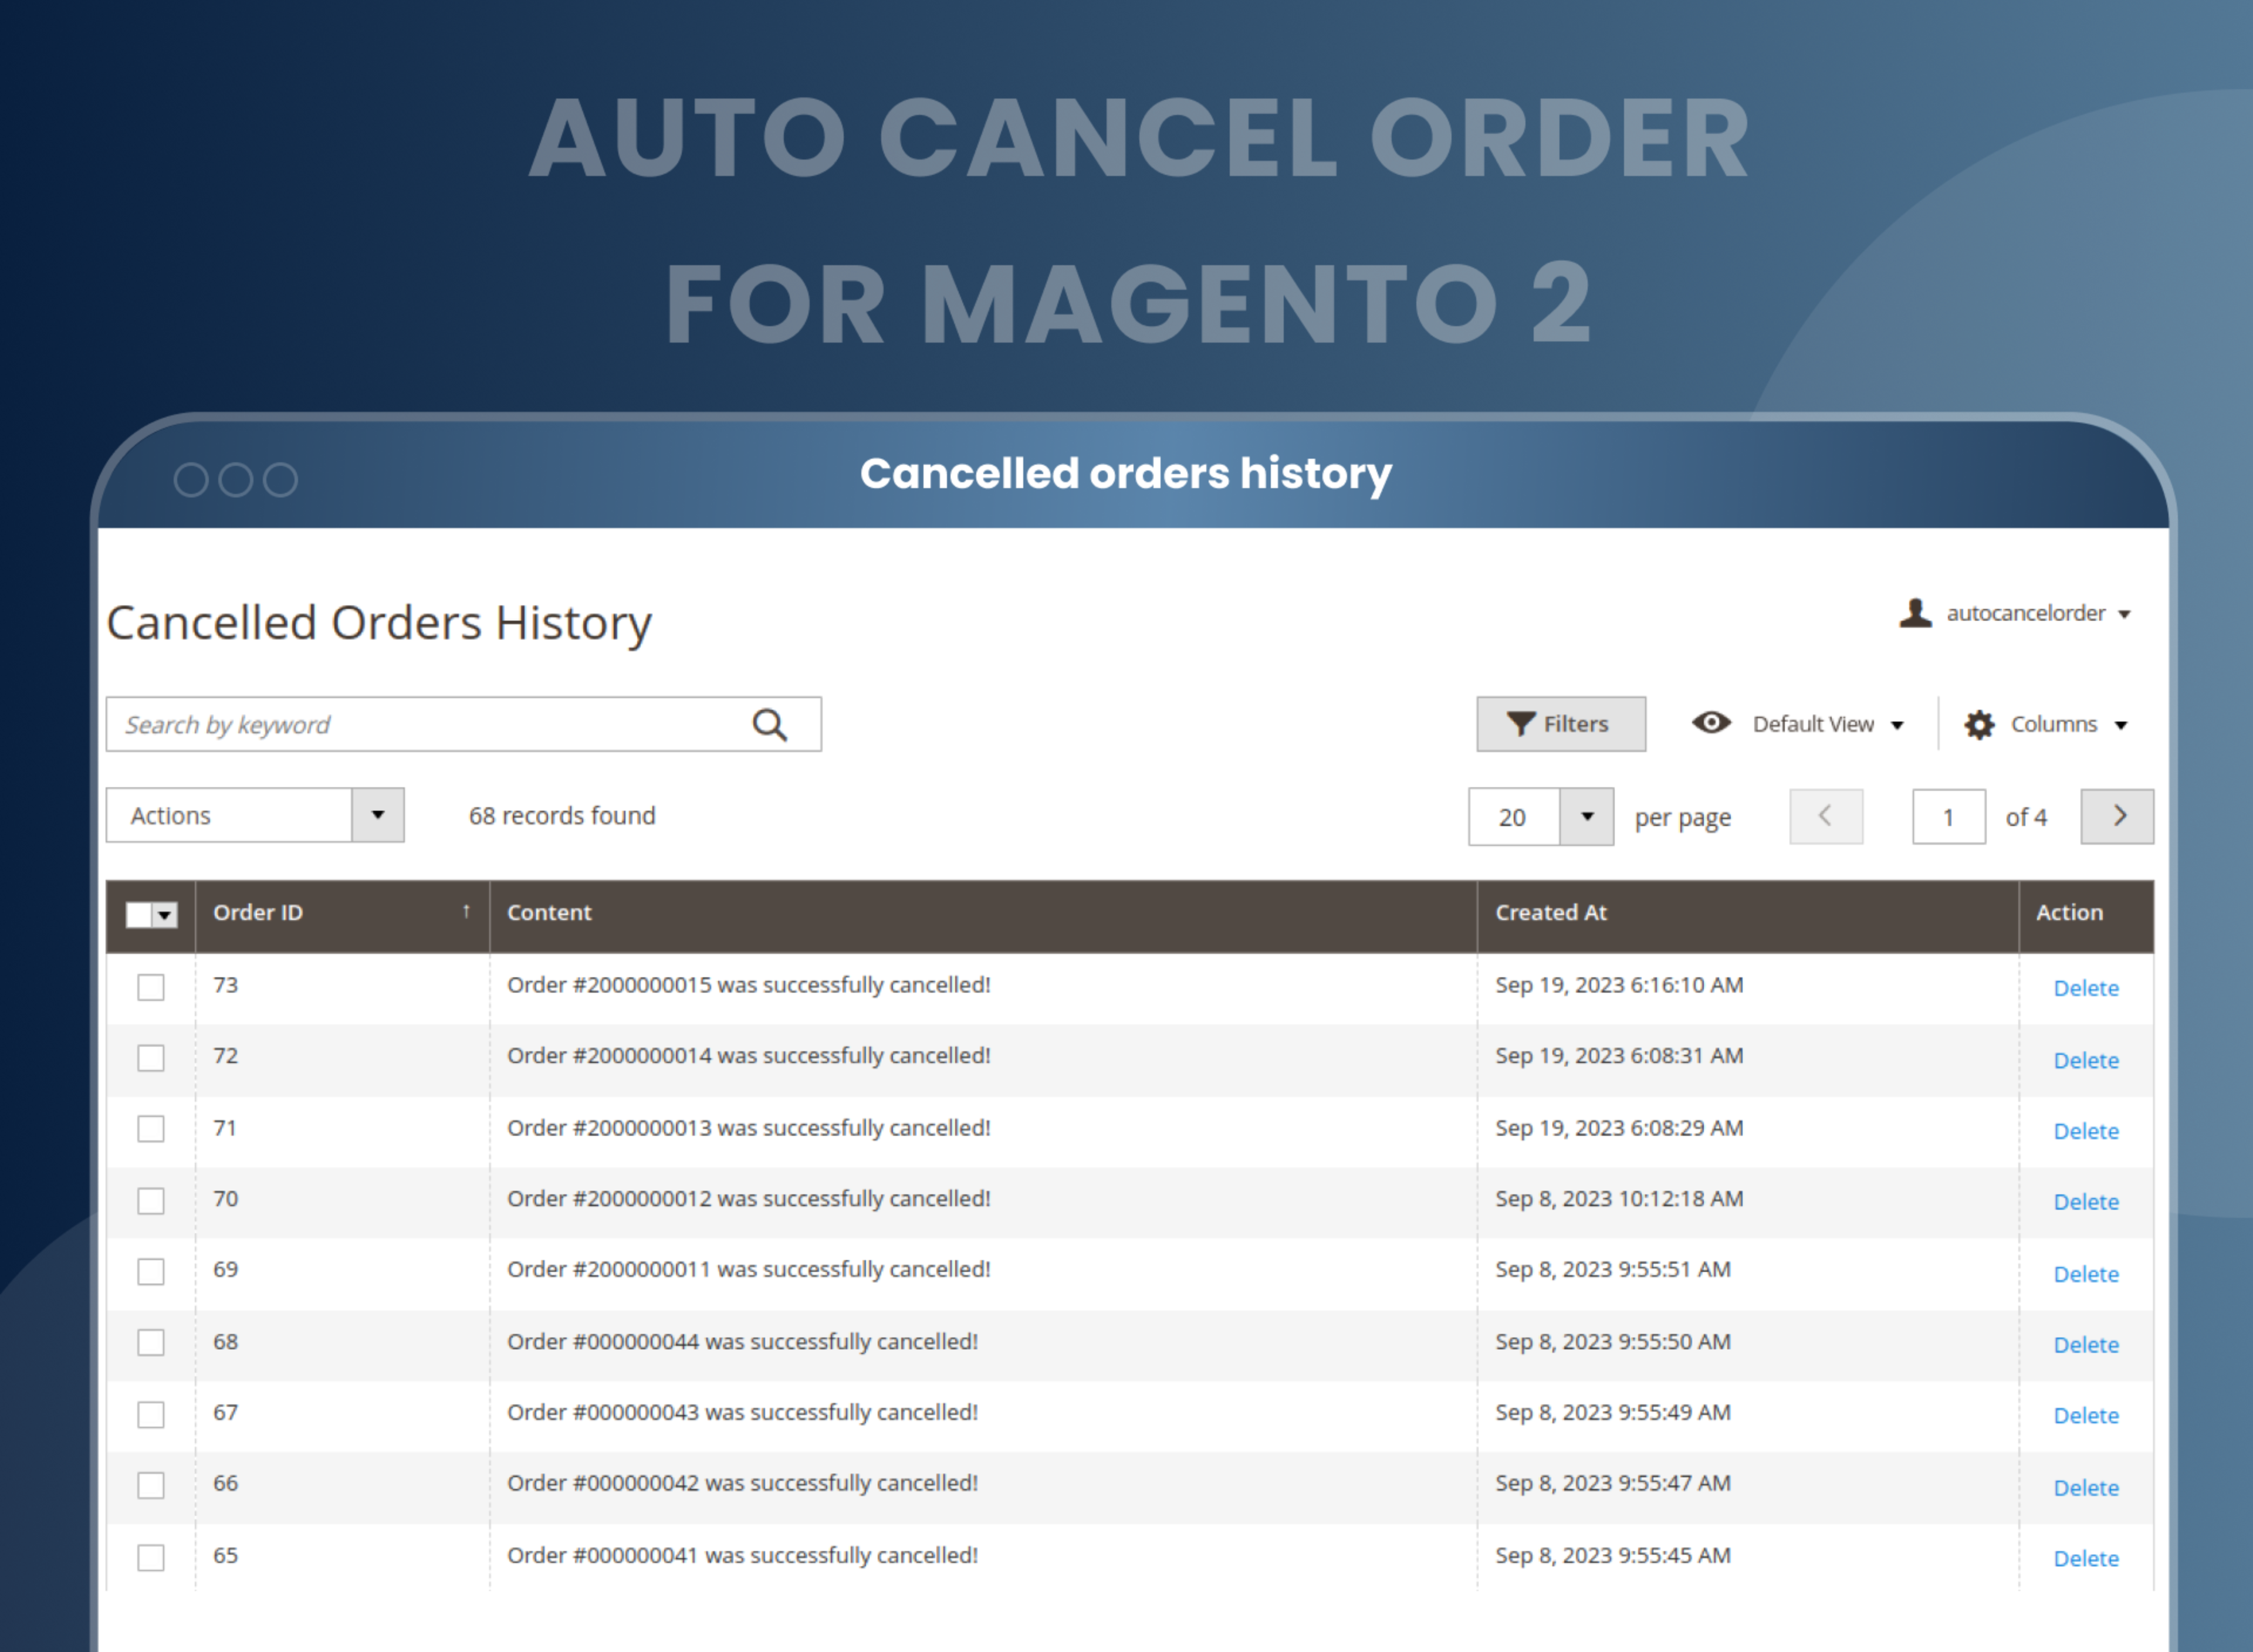  Cancelled orders history